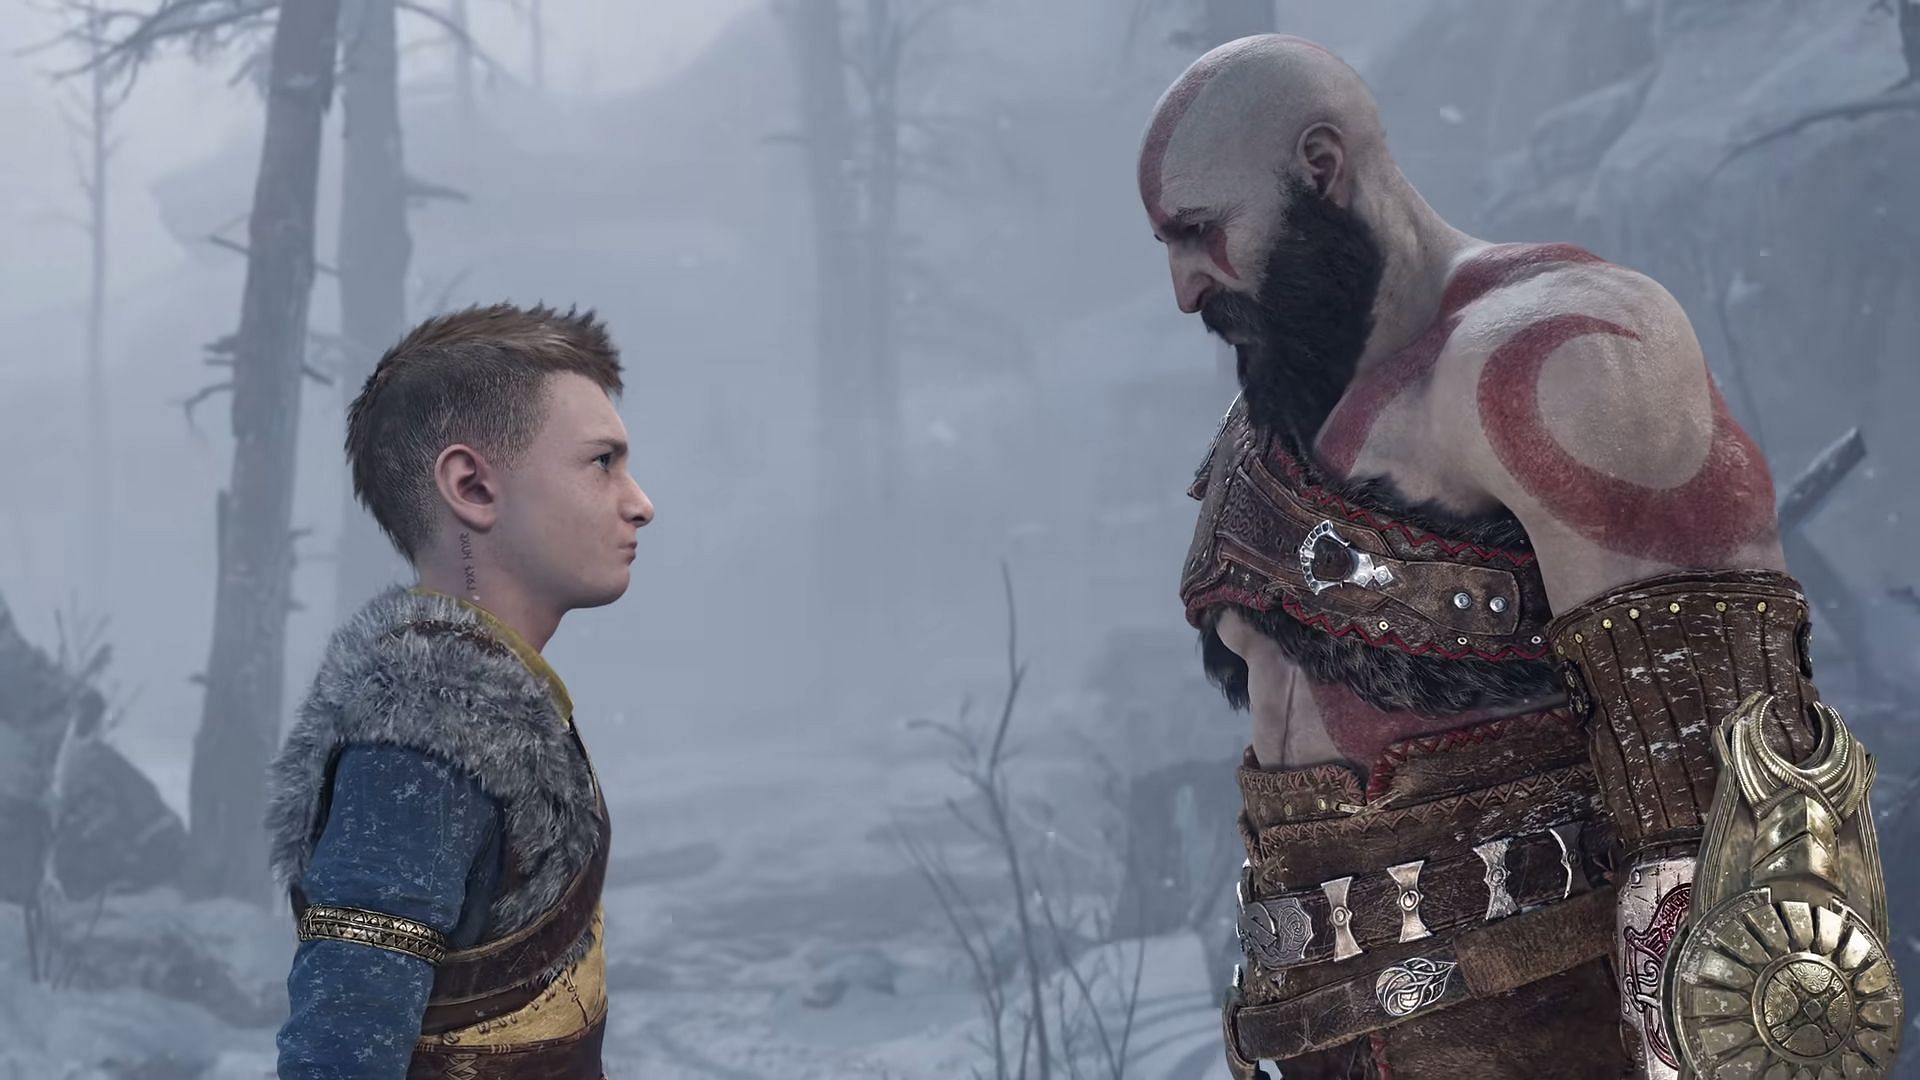 God of War plot and lore explainer: the story so far